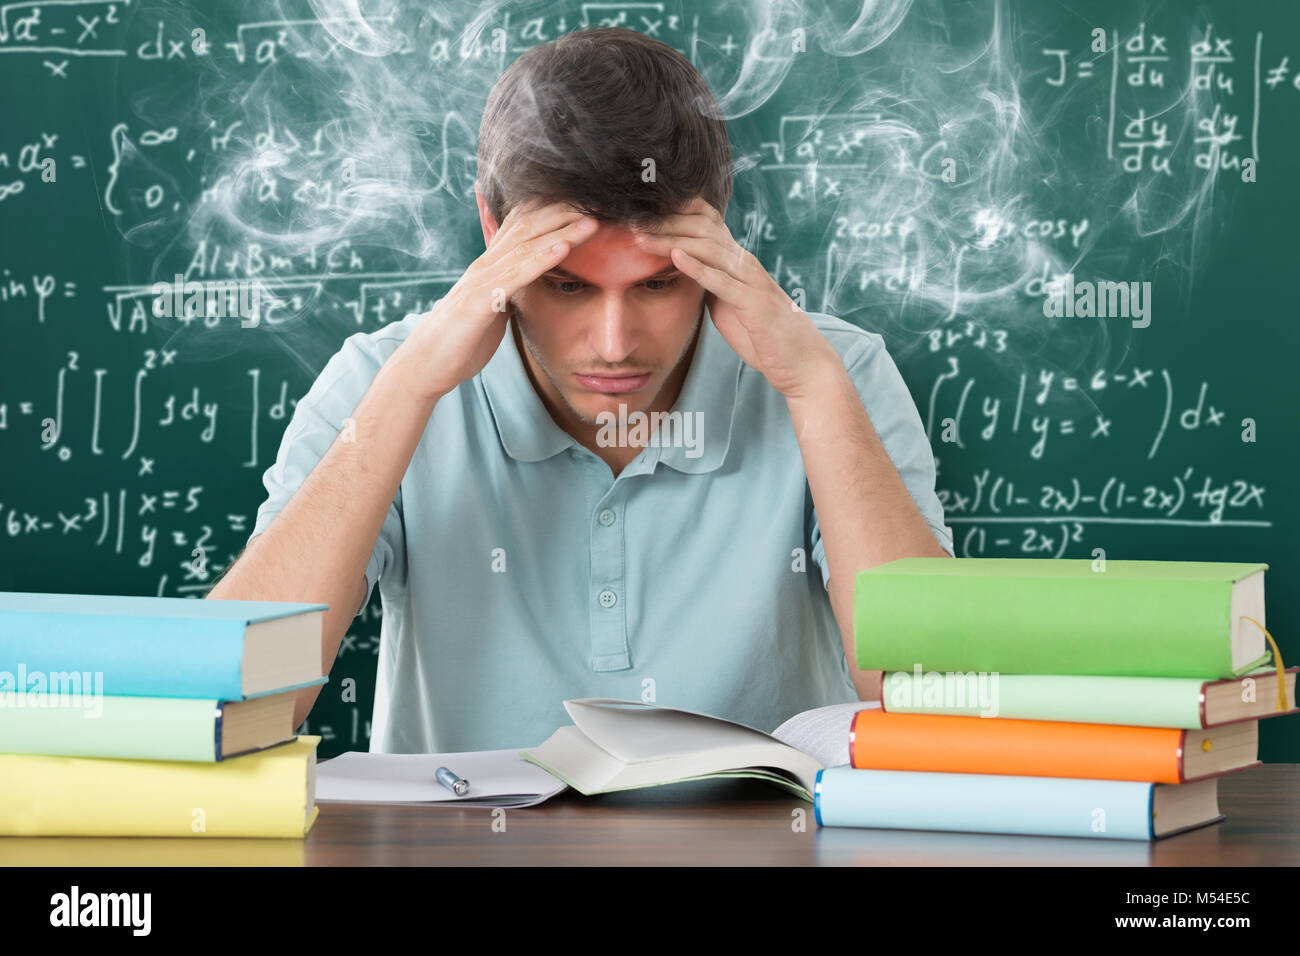 Worried Male Student Looking At Books At Wooden Desk Stock Photo